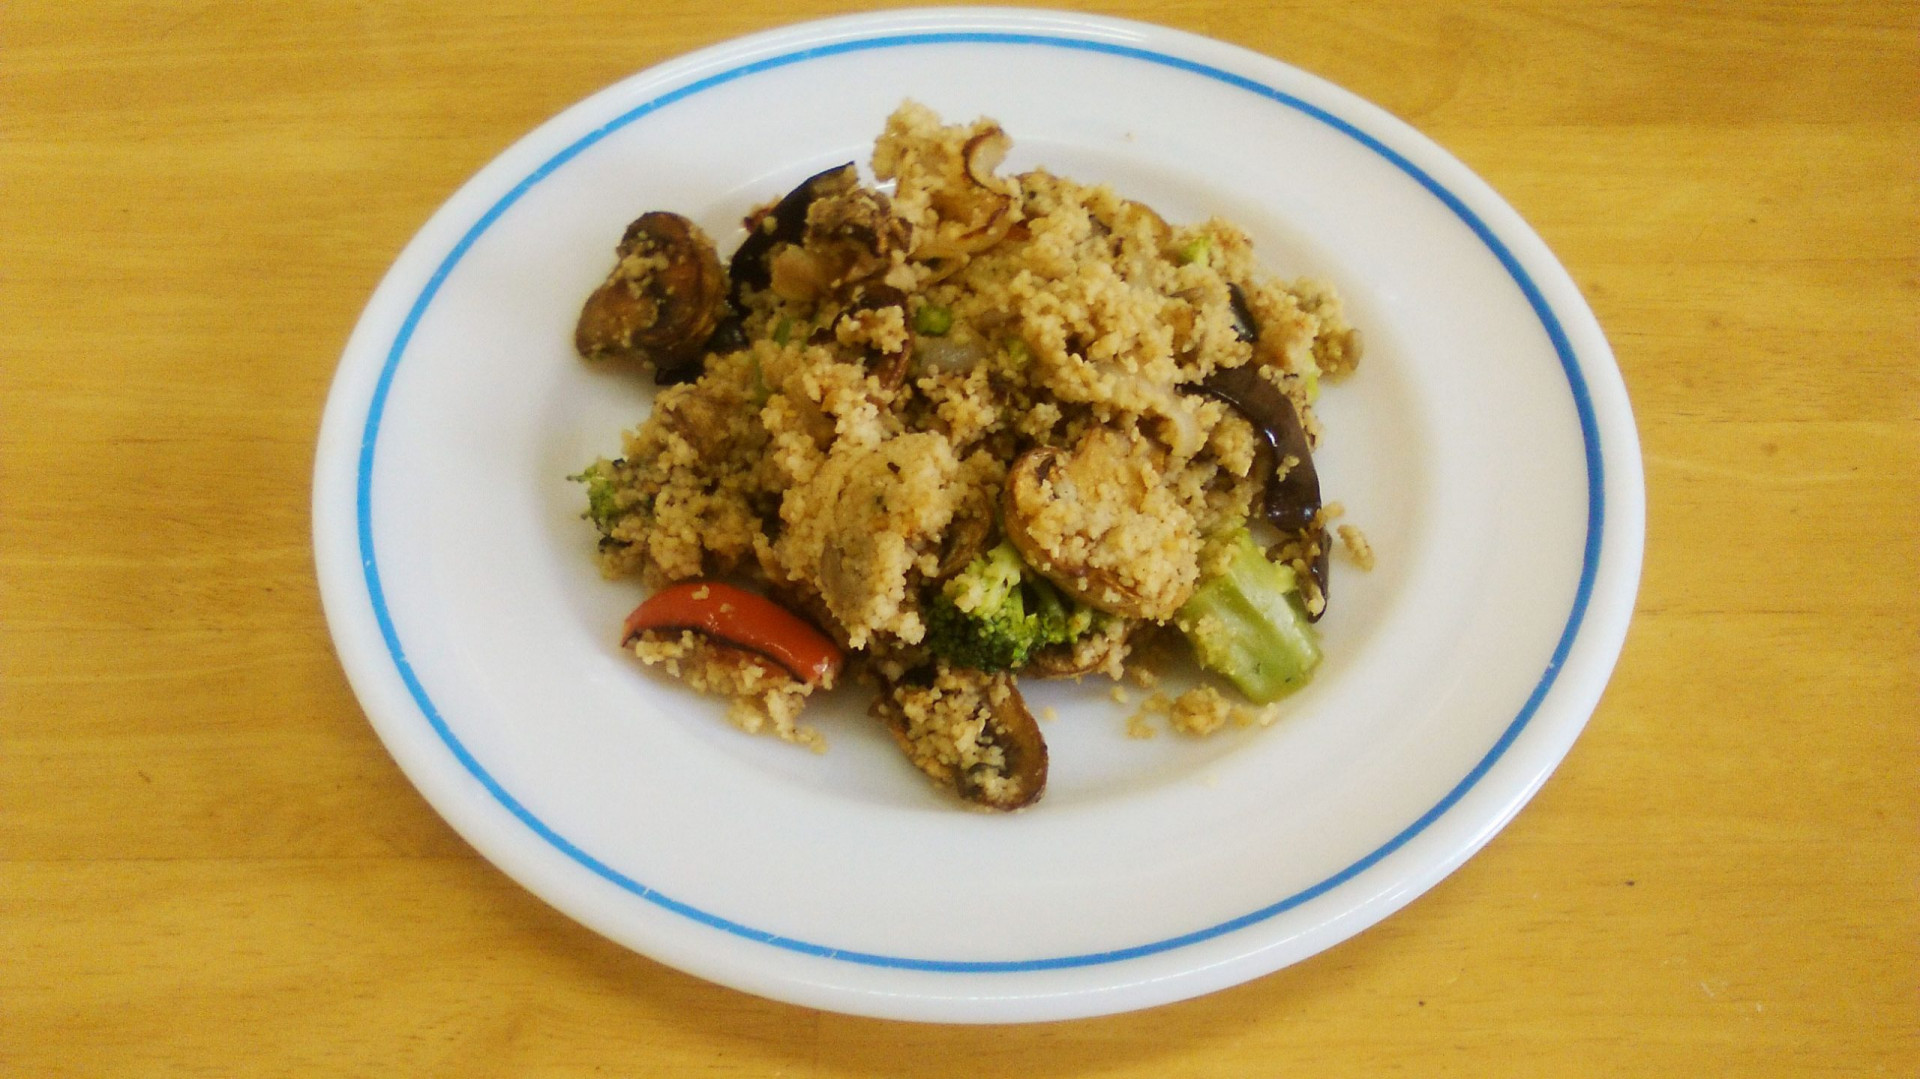 Roast vegetable with couscous